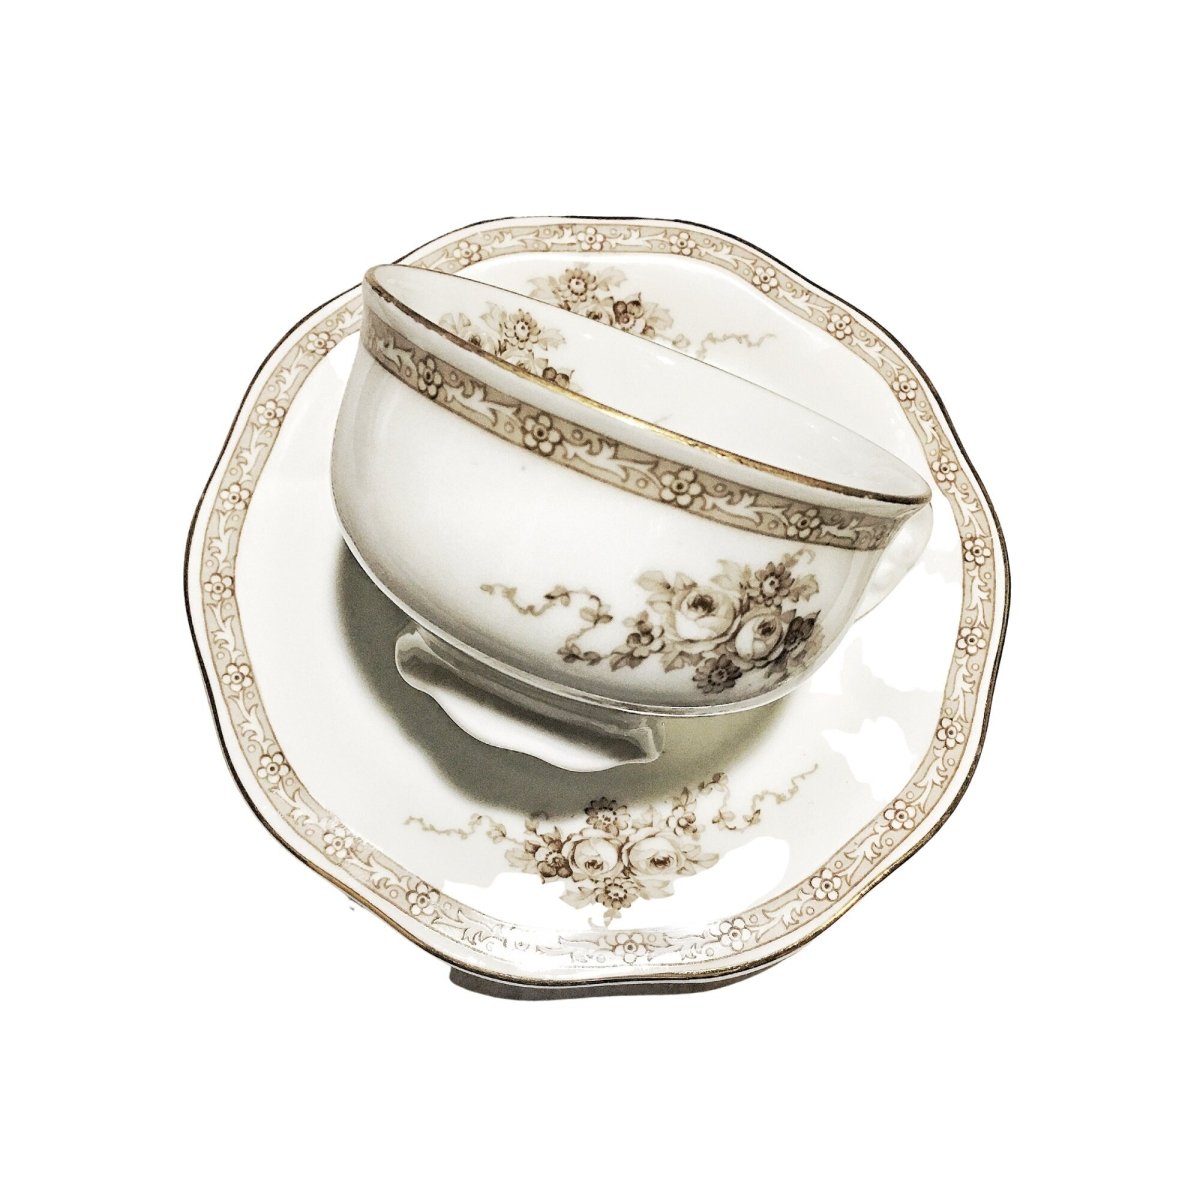 Pirkenhammer Antique | Bohemian Floral Cup & Saucer | Czechslovakia | Muted Brown Florilla and Gold Trim, Perfect for a tea party - Chinamania.shop